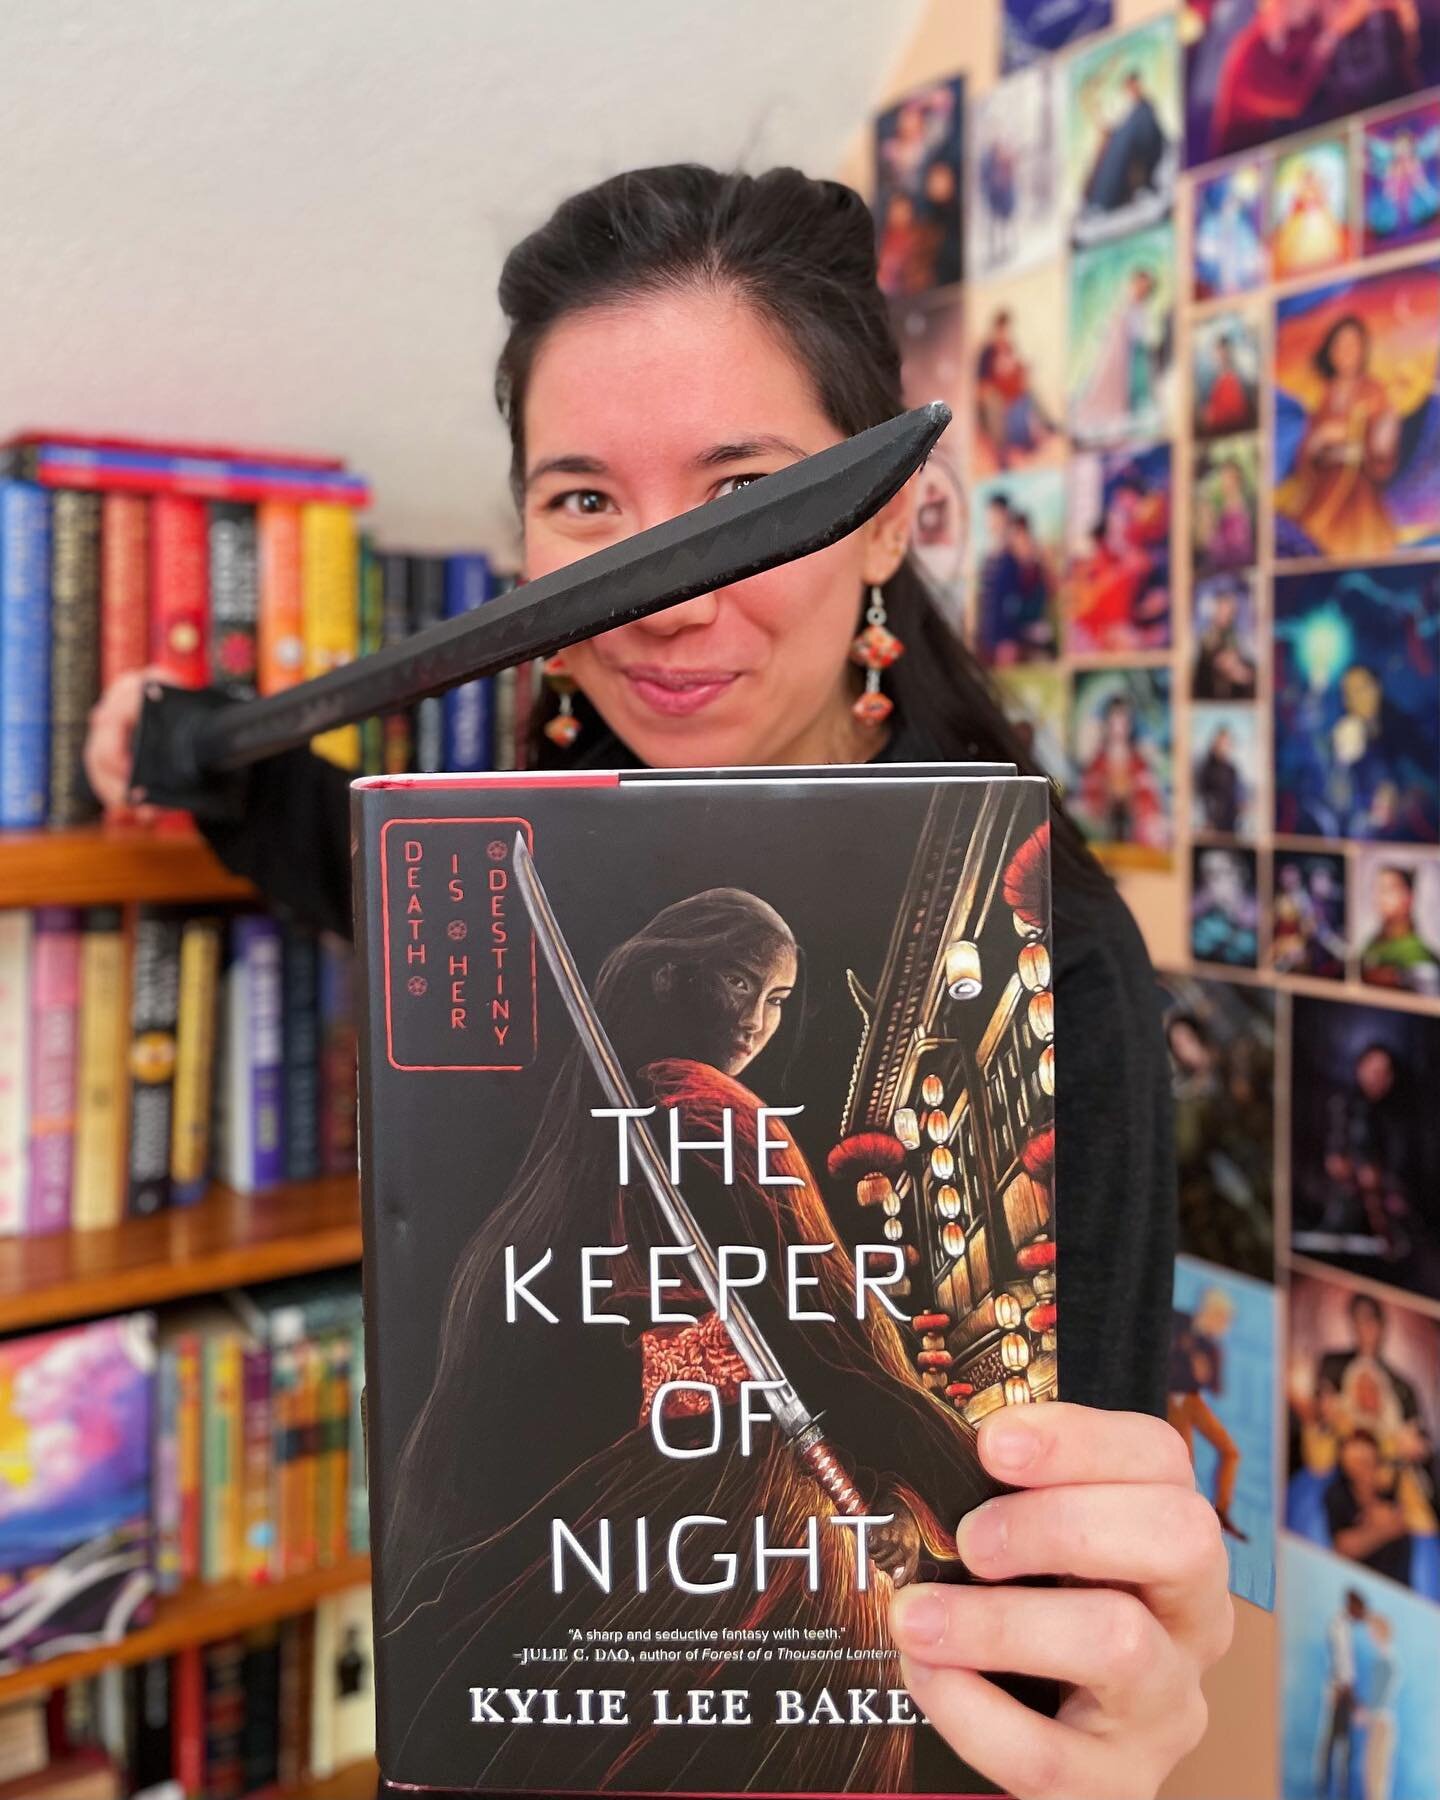 Just popping in quickly to say that if you haven&rsquo;t read The Keeper of Night by @kylieleebaker yet, you&rsquo;re missing out on a standout, deliciously dark fantasy and my darling Ren: the angry, biracial girl with a sword who gave me permission